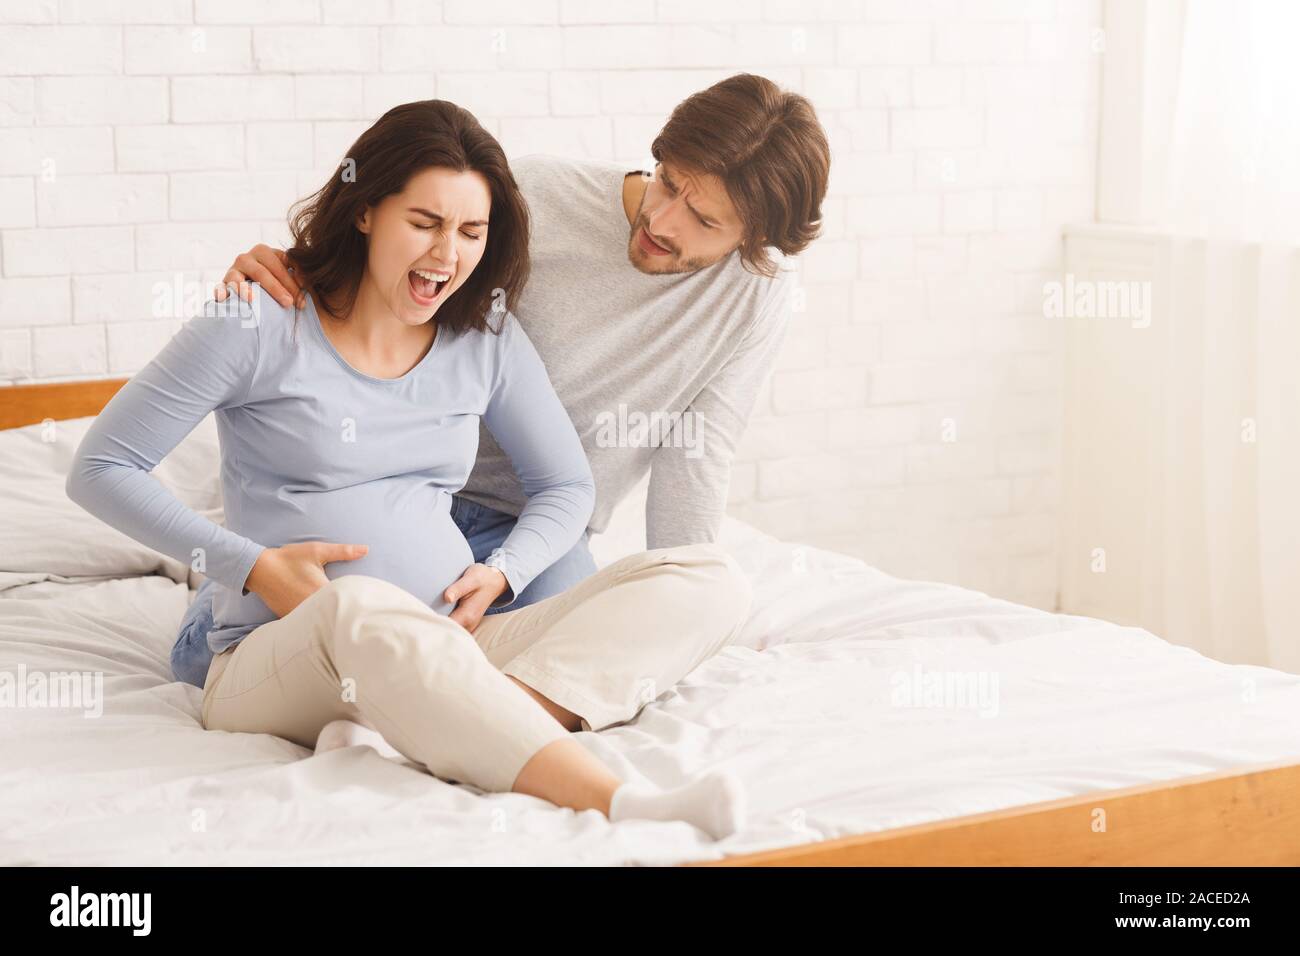 Worried husband comforting pregnant wife that suffering from prenatal contractions Stock Photo